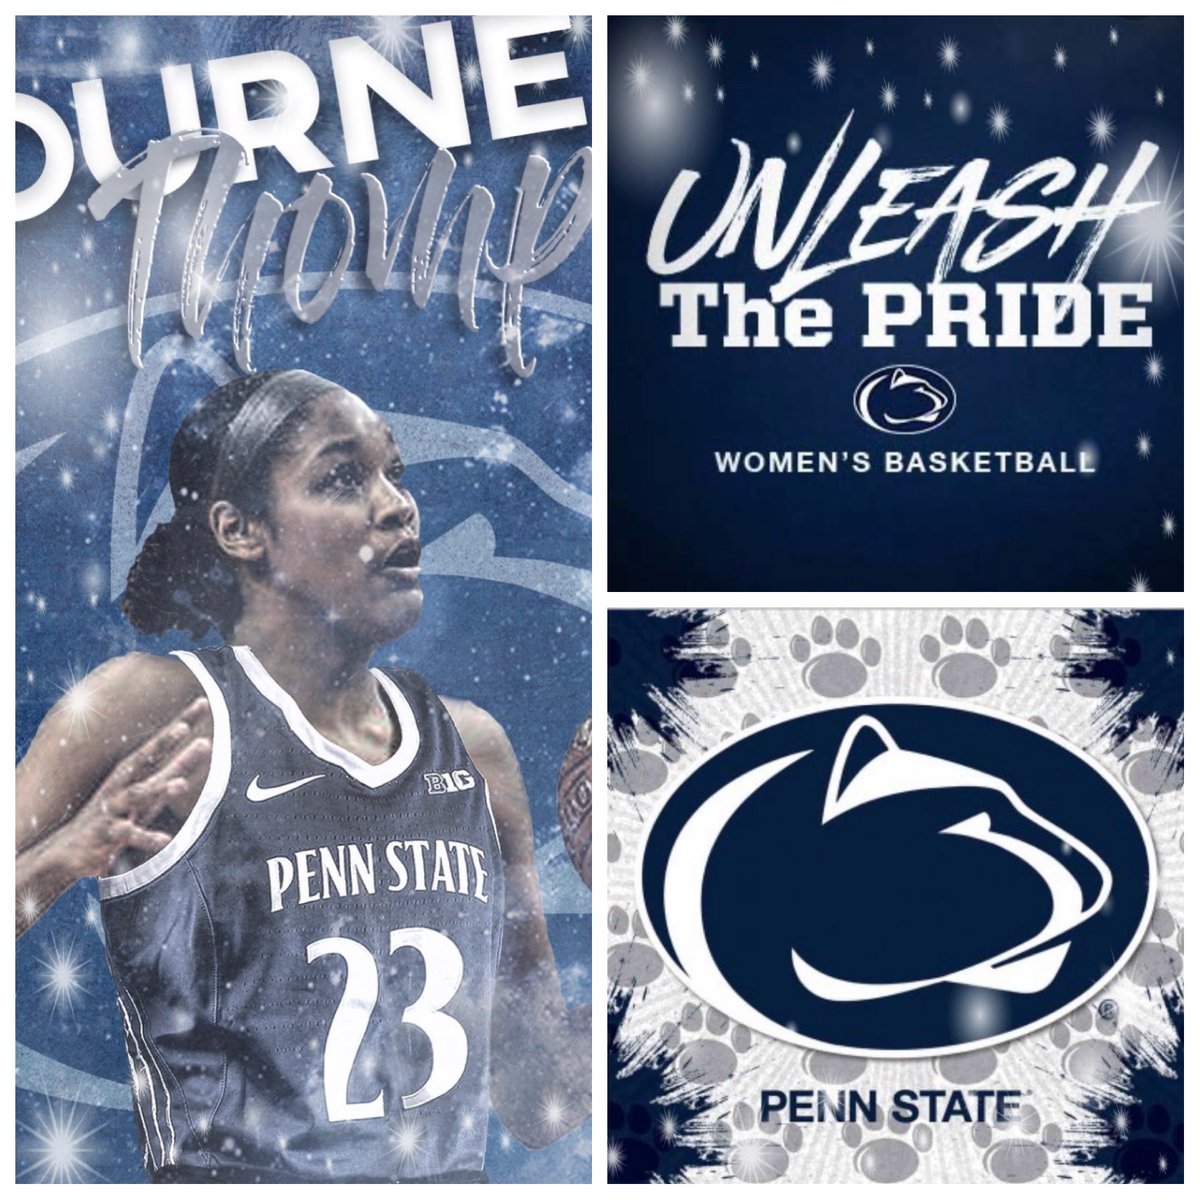 Thank you Coach Keiger for offering me a scholarship to play at Penn State University! I am so grateful and honored for this amazing opportunity! 🙏🏼@CoachKiegs @PennStateWBB